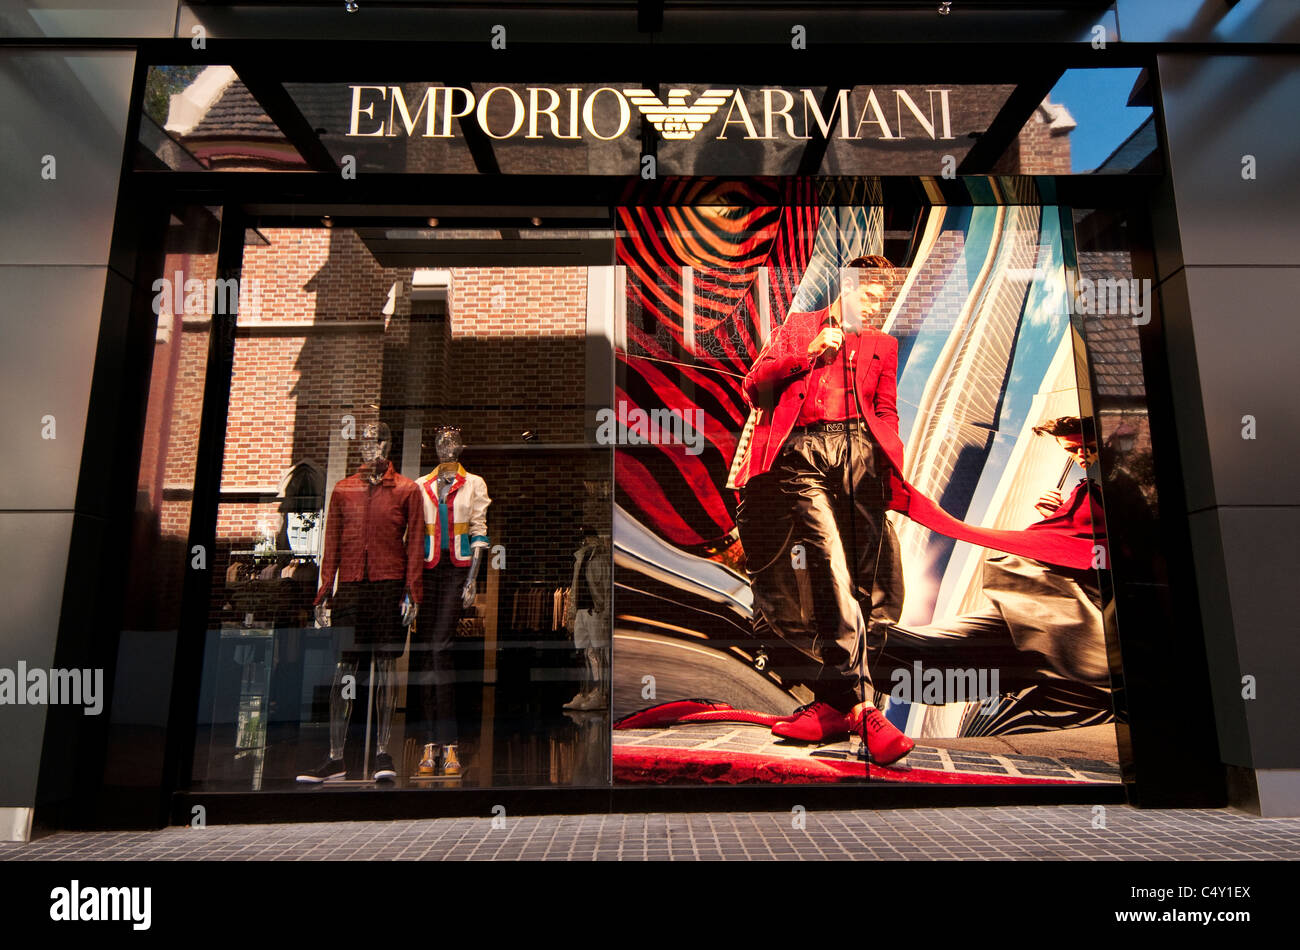 Emporio Armani You Perfume on the Shop Display for Sale, Italian Fashion  House Founded by Giorgio Armani Editorial Stock Photo - Image of fashion,  brussels: 175669058